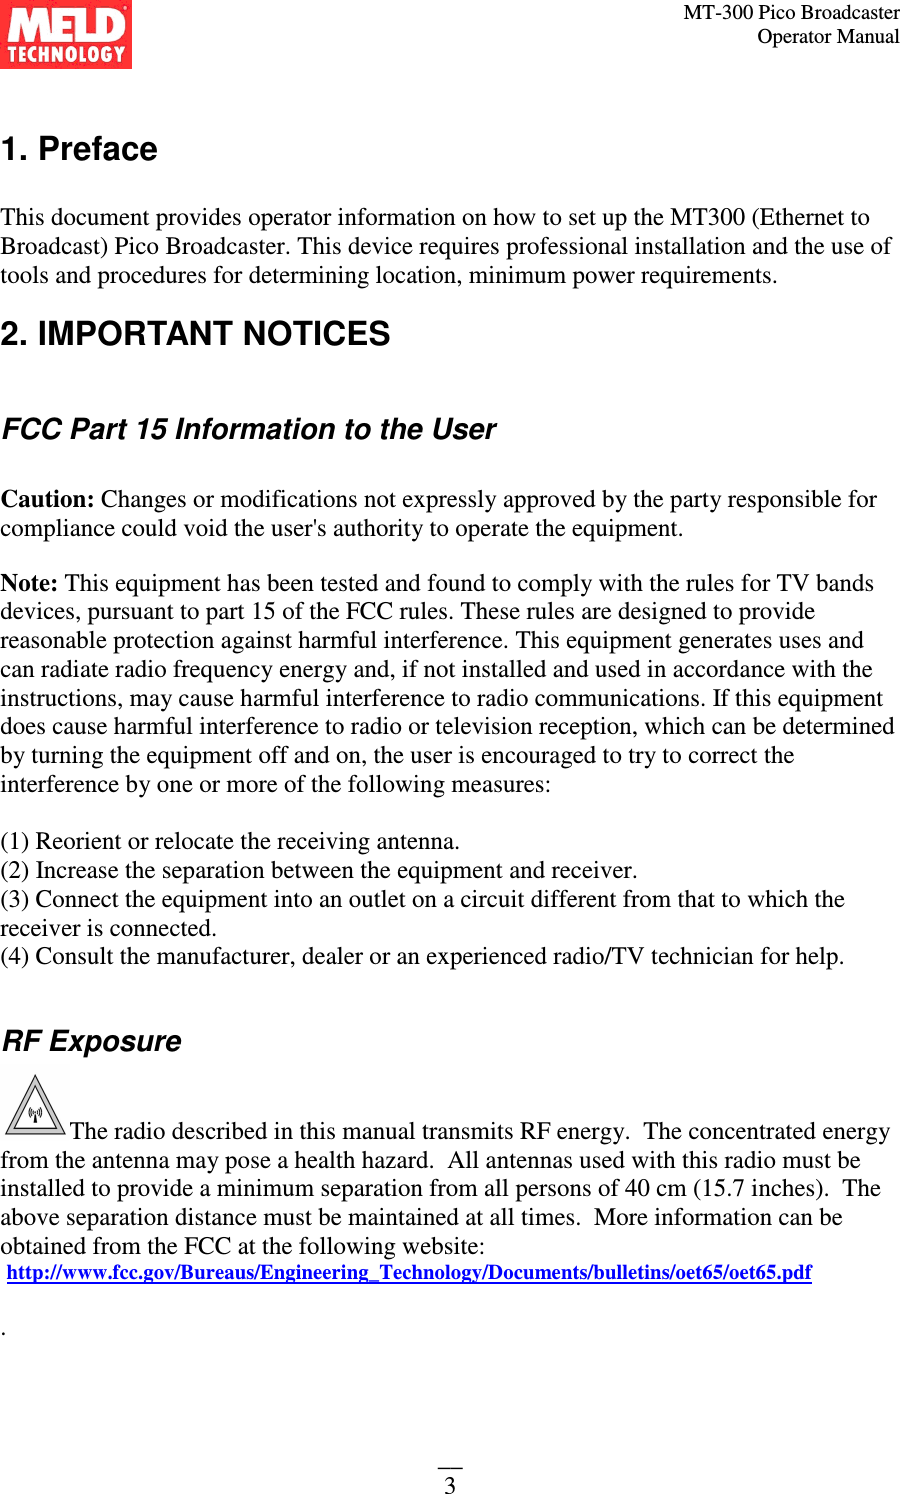 MT-300 Pico Broadcaster                                                                                                                                             Operator Manual __ 3  1. Preface  This document provides operator information on how to set up the MT300 (Ethernet to Broadcast) Pico Broadcaster. This device requires professional installation and the use of tools and procedures for determining location, minimum power requirements. 2. IMPORTANT NOTICES  FCC Part 15 Information to the User  Caution: Changes or modifications not expressly approved by the party responsible for compliance could void the user&apos;s authority to operate the equipment.  Note: This equipment has been tested and found to comply with the rules for TV bands devices, pursuant to part 15 of the FCC rules. These rules are designed to provide reasonable protection against harmful interference. This equipment generates uses and can radiate radio frequency energy and, if not installed and used in accordance with the instructions, may cause harmful interference to radio communications. If this equipment does cause harmful interference to radio or television reception, which can be determined by turning the equipment off and on, the user is encouraged to try to correct the interference by one or more of the following measures:  (1) Reorient or relocate the receiving antenna. (2) Increase the separation between the equipment and receiver. (3) Connect the equipment into an outlet on a circuit different from that to which the receiver is connected. (4) Consult the manufacturer, dealer or an experienced radio/TV technician for help.  RF Exposure          The radio described in this manual transmits RF energy.  The concentrated energy from the antenna may pose a health hazard.  All antennas used with this radio must be installed to provide a minimum separation from all persons of 40 cm (15.7 inches).  The above separation distance must be maintained at all times.  More information can be obtained from the FCC at the following website:  http://www.fcc.gov/Bureaus/Engineering_Technology/Documents/bulletins/oet65/oet65.pdf  . 